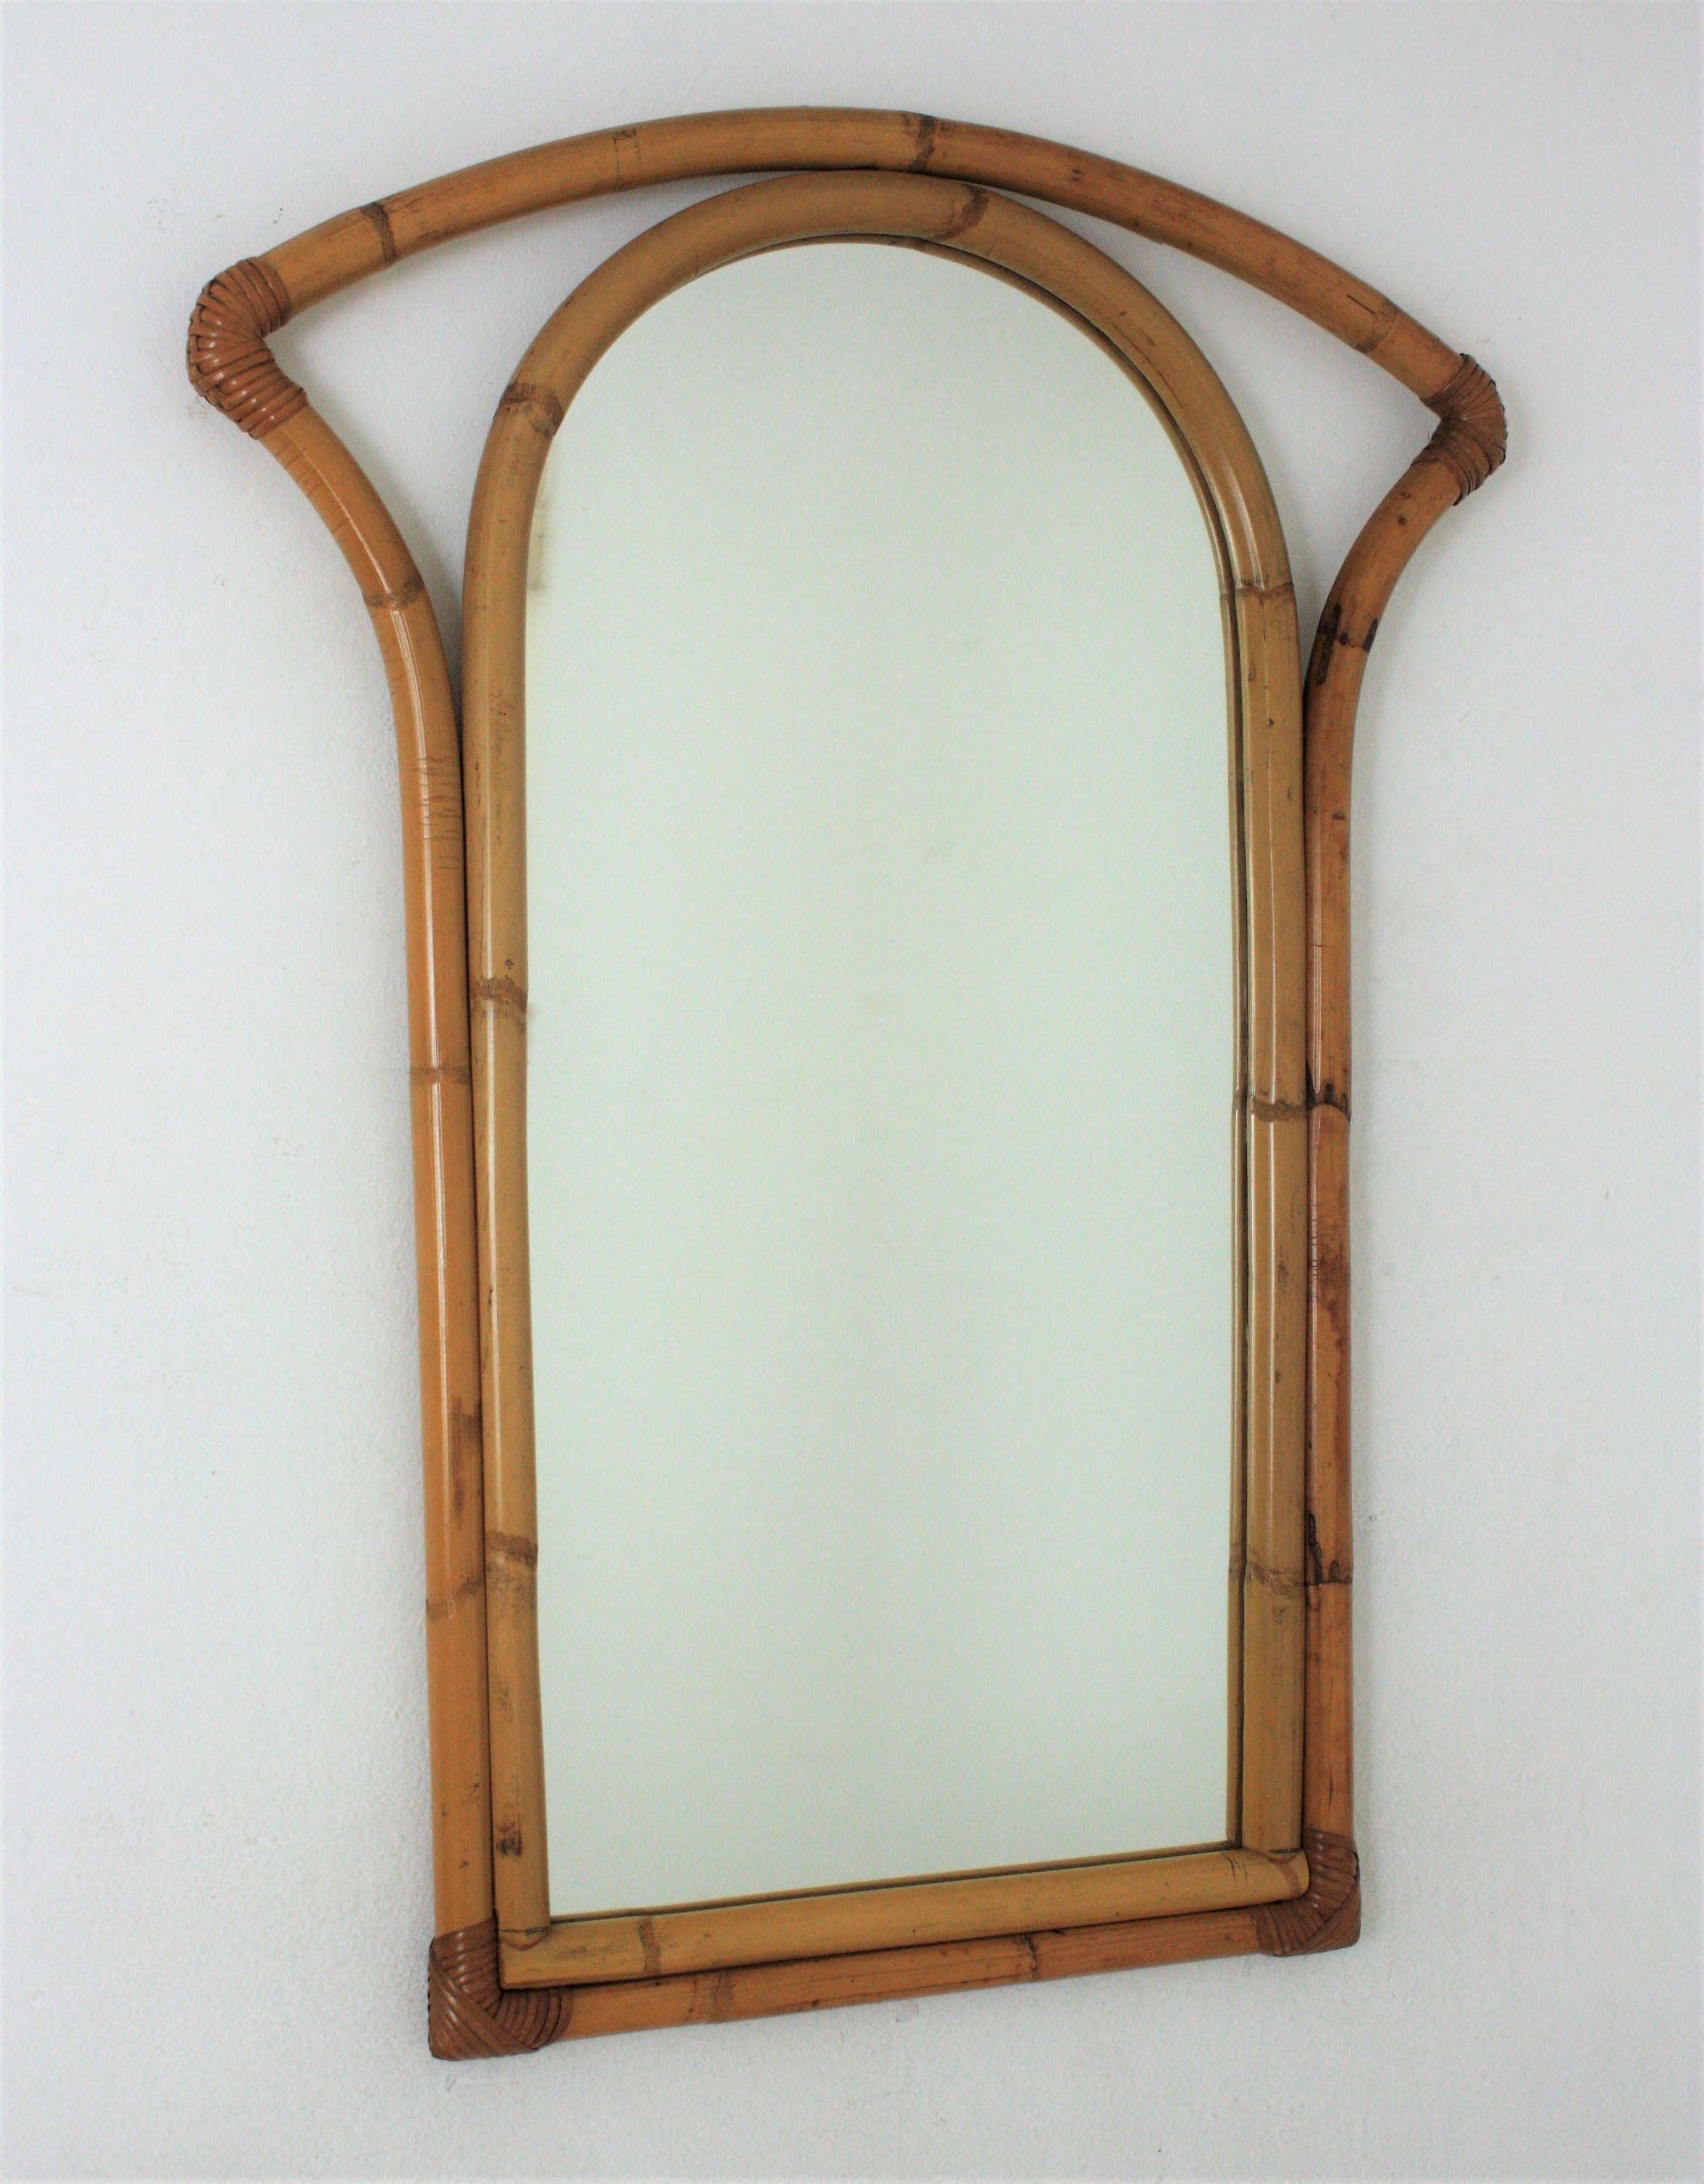 Rectangular wall mirror, bamboo, rattan
Eye-catching rectangular mirror handcrafted with bamboo cane. Spain, 1960s.
This mirror features a double bamboo rattan frame. One with round top and the second one with free-form top.
It will be a nice